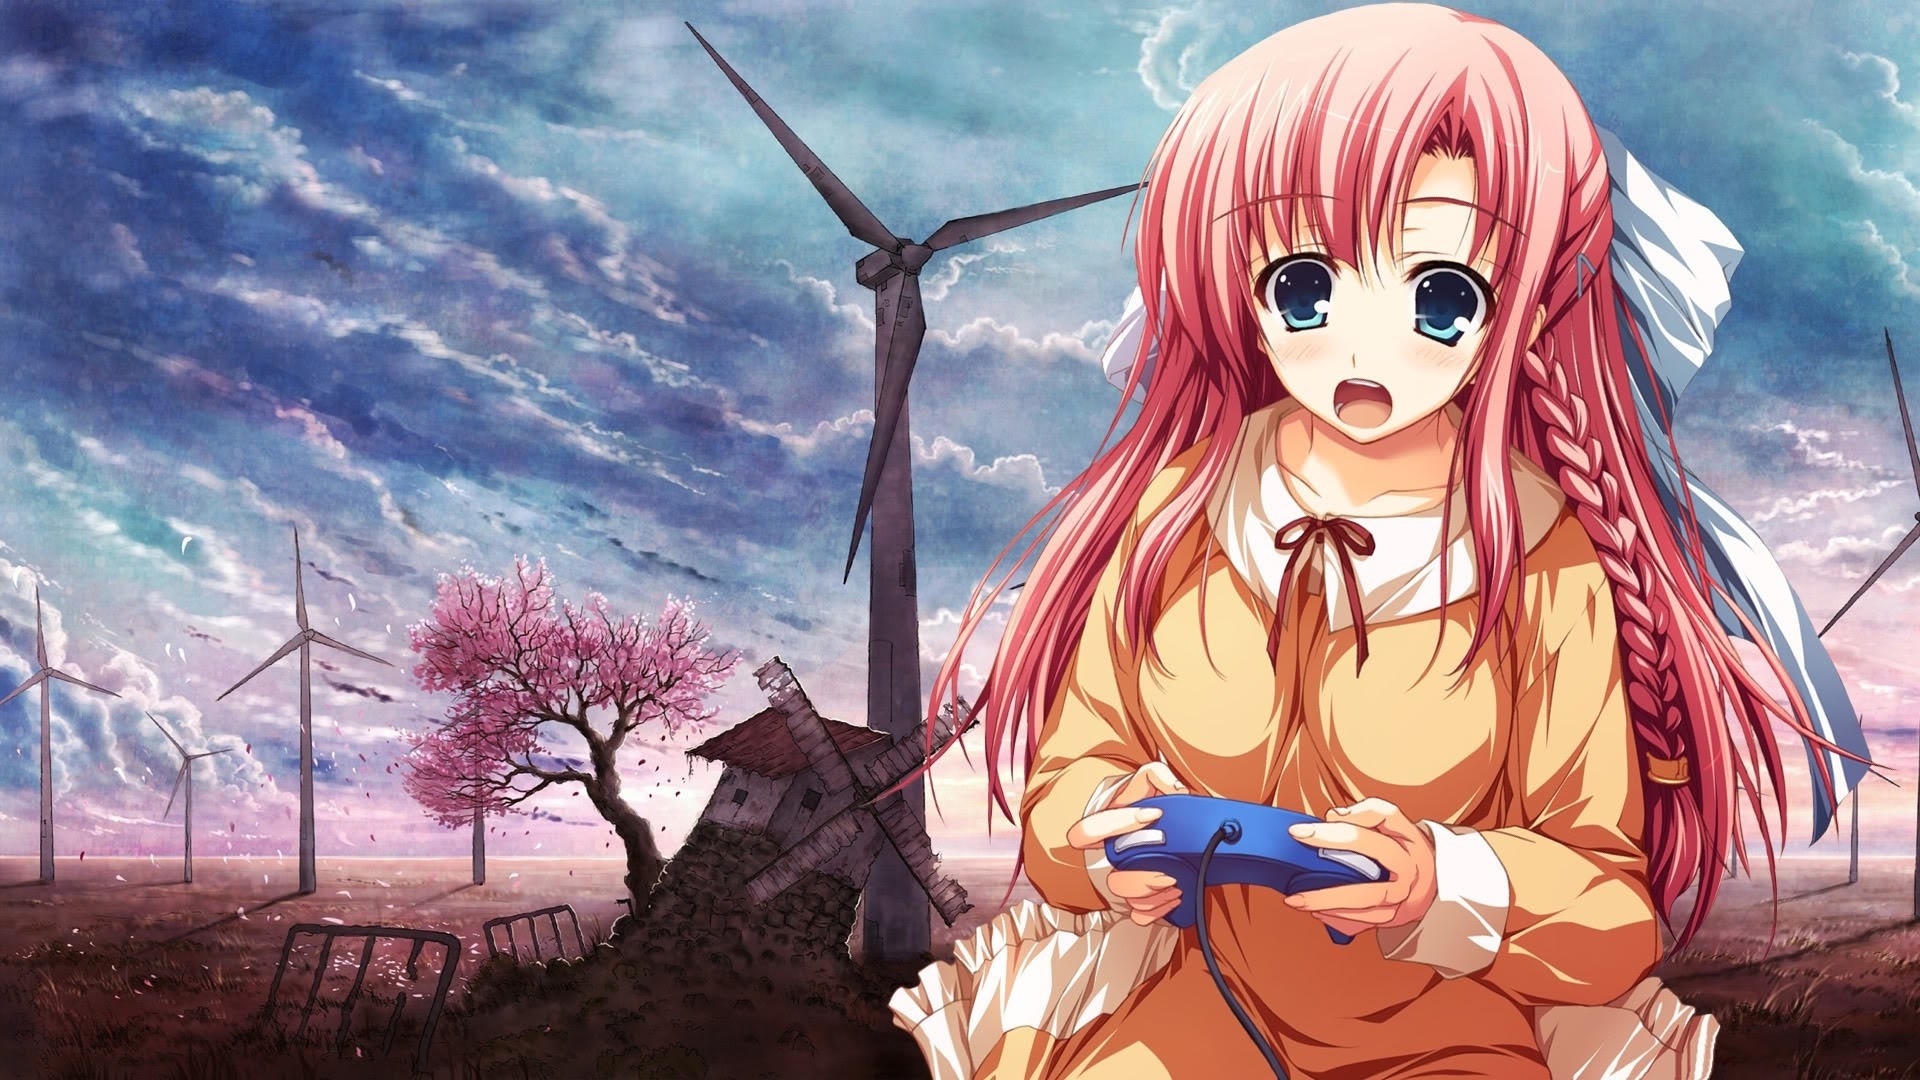 Anime Girls Pink Hair Braids Controllers Wind Turbine Windmill Cherry Blossom Anime Controller Open  1920x1080